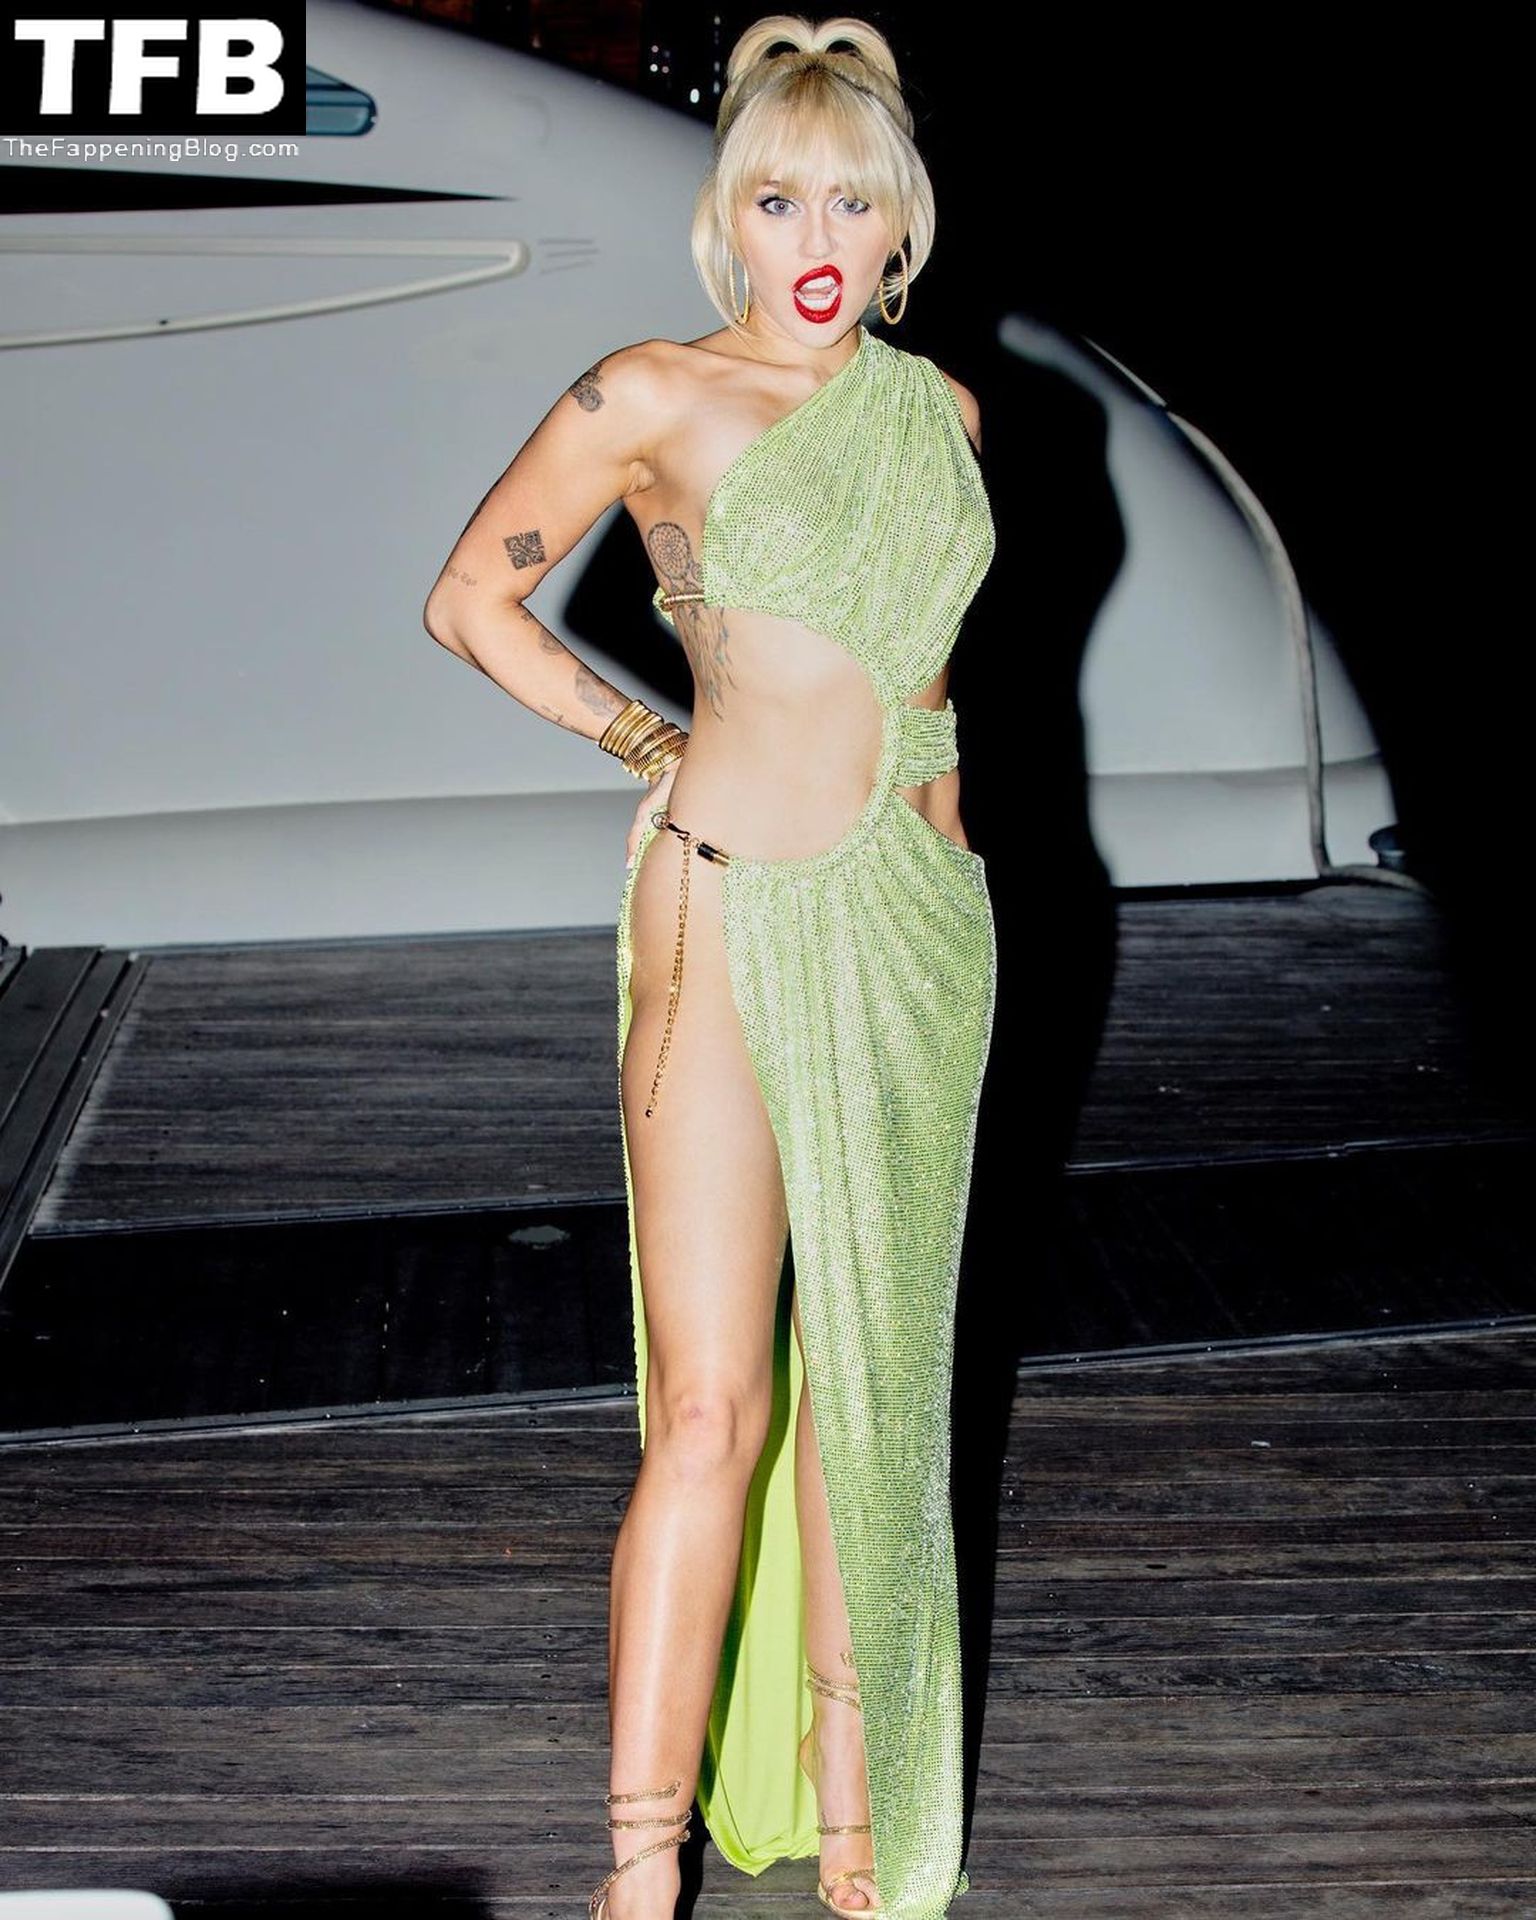 Miley-Cyrus-Pantyless-in-Sexy-Dress-5-thefappeningblog.com_.jpg